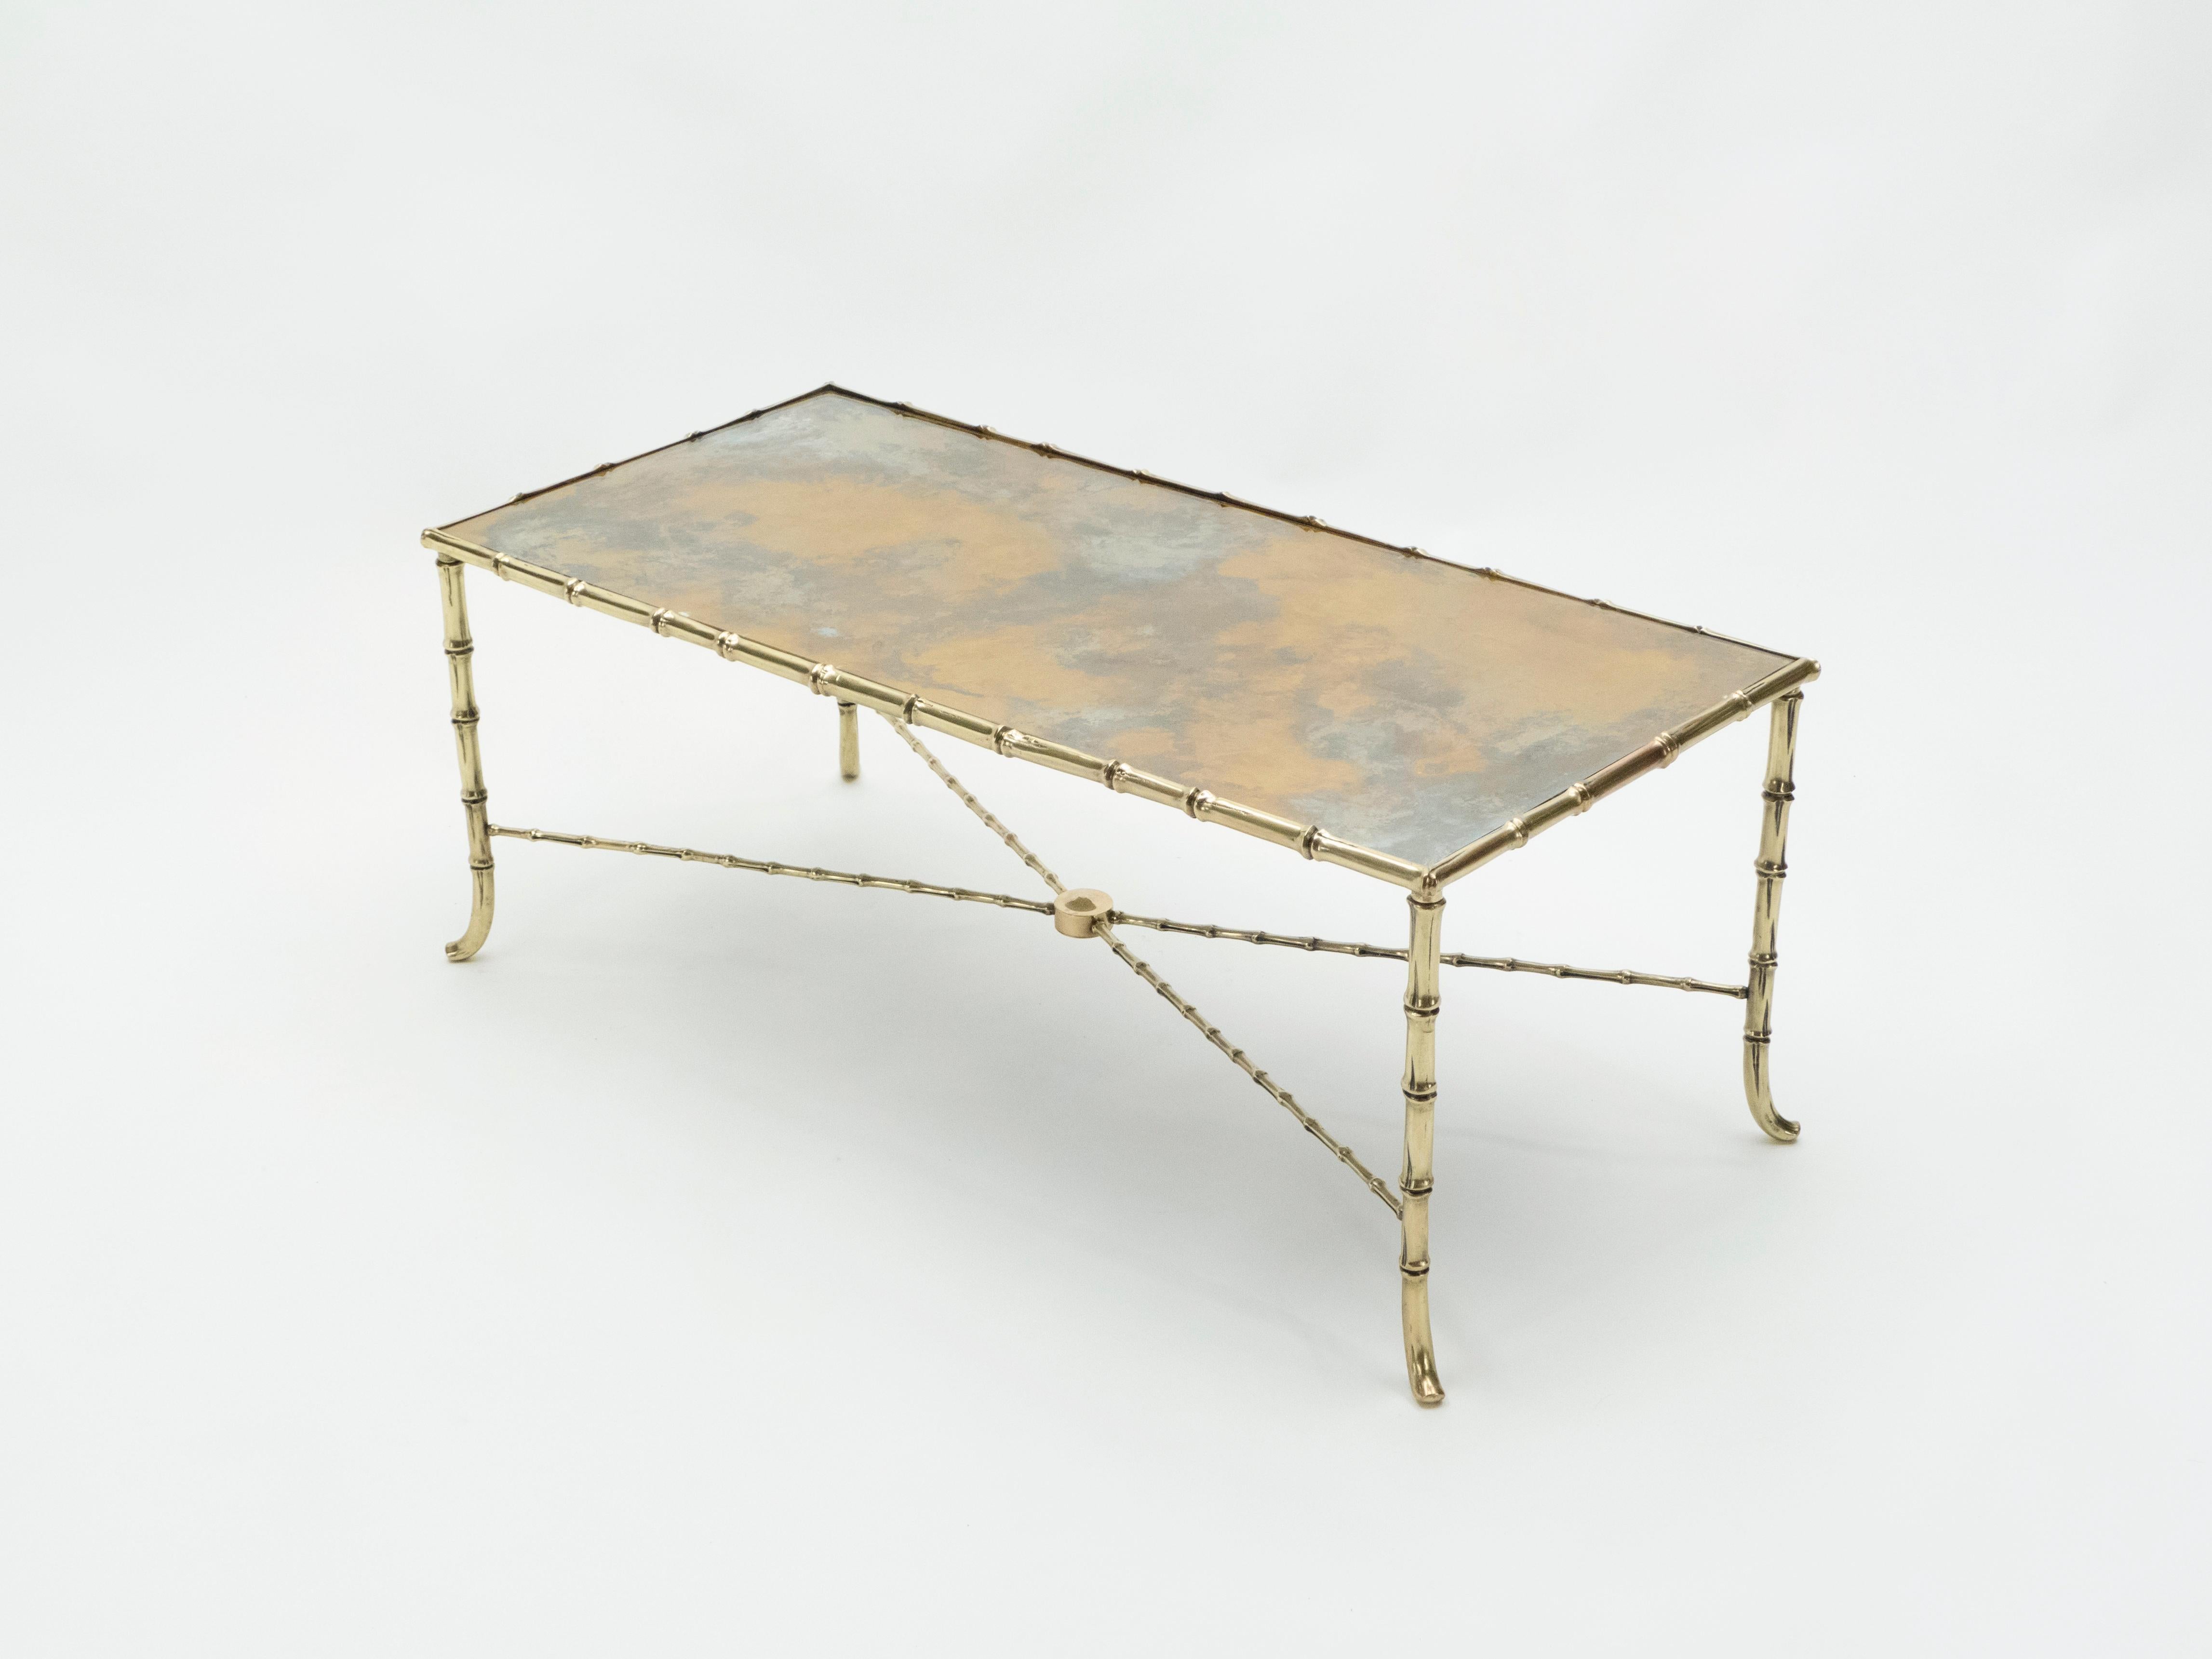 This coffee table by French design house Maison Jansen was created with solid brass and typical French neoclassical brass bamboo and old patina mirror, circa 1960. The old patina mirrored top is smooth, while the brass bamboo feet provide an